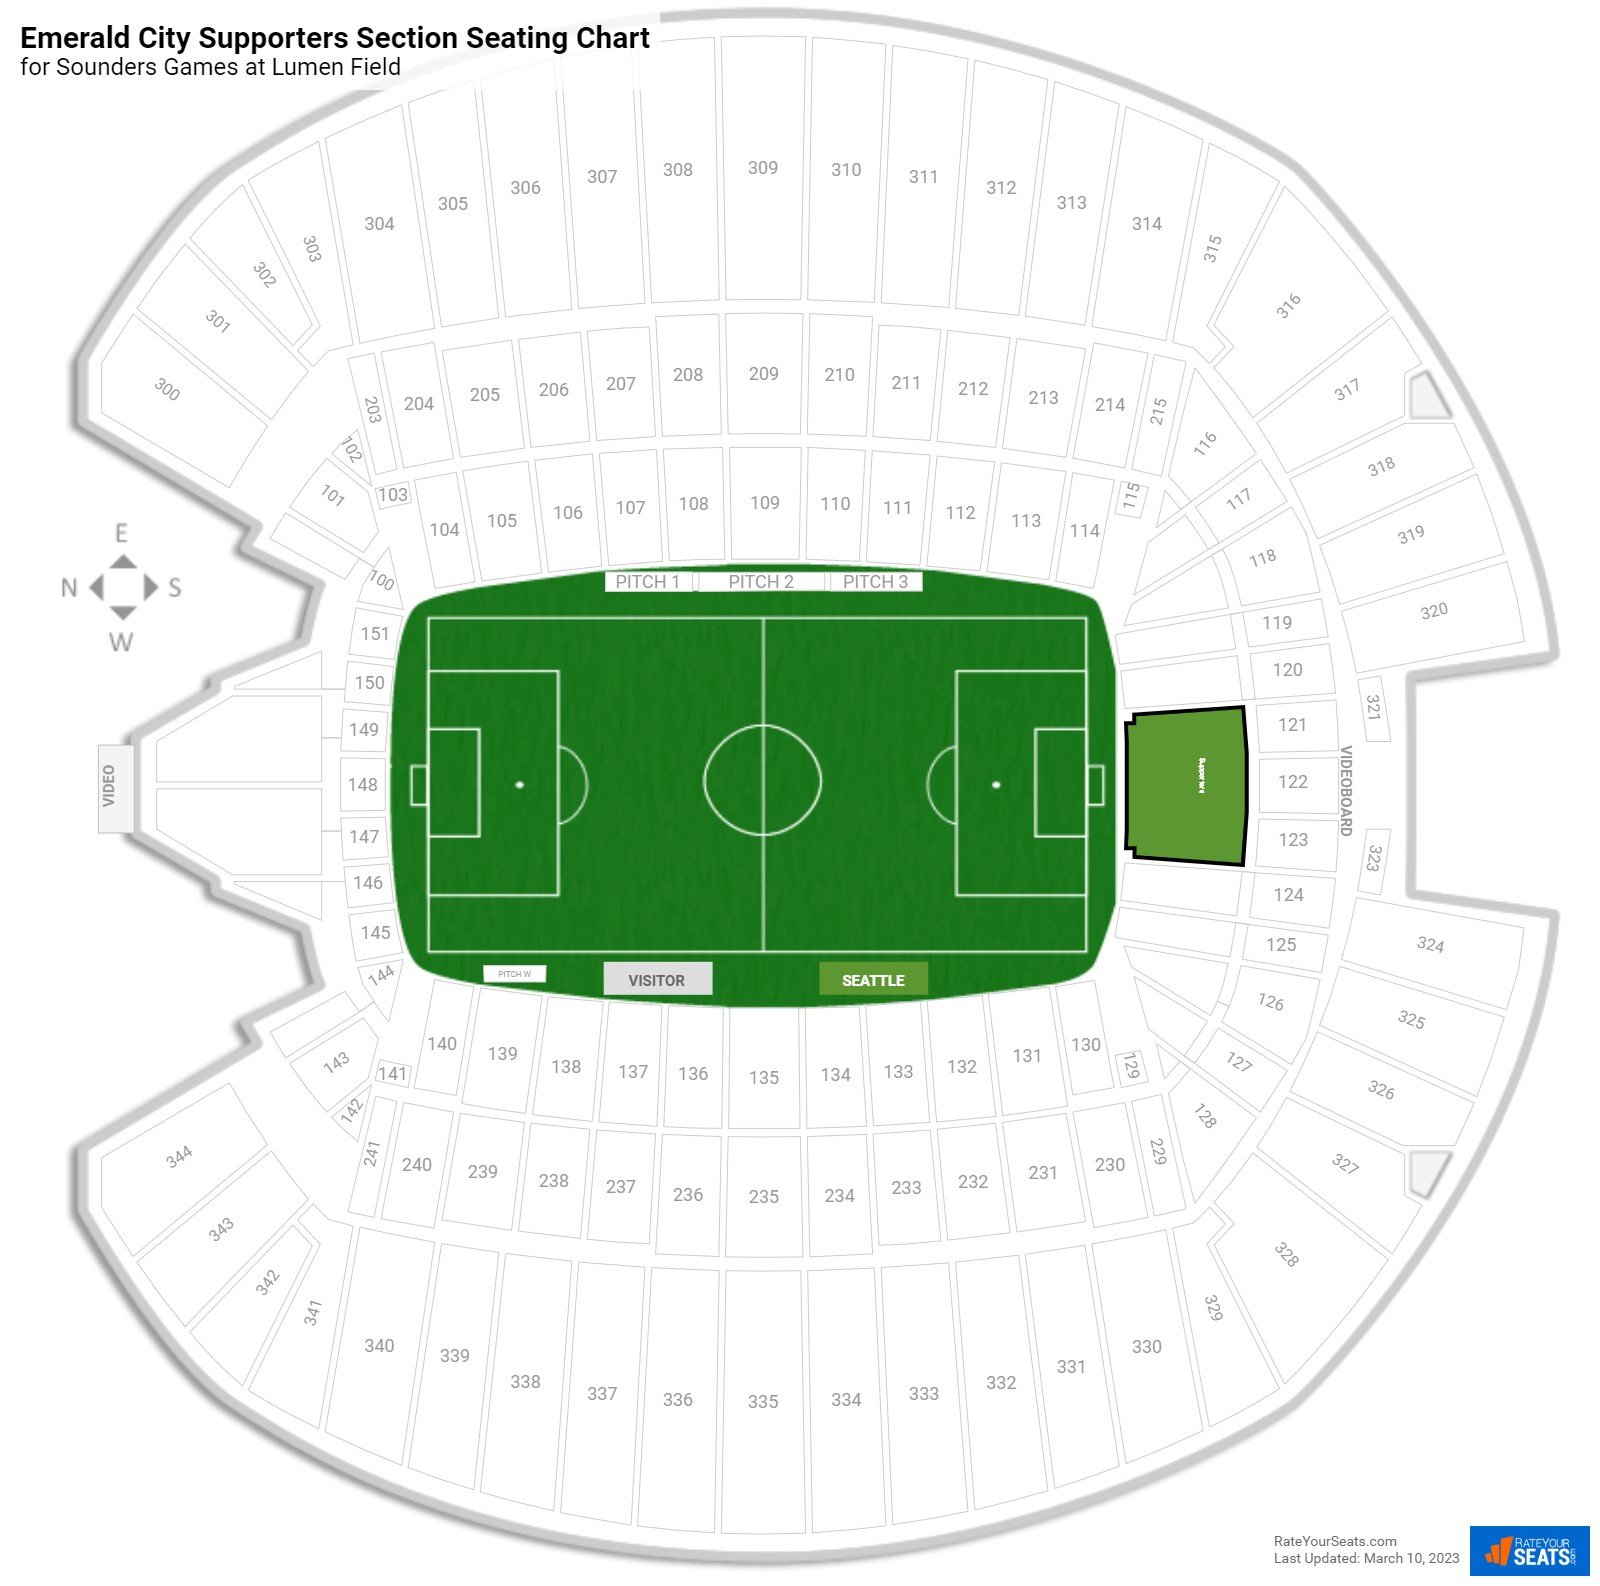 Sounders Emerald City Supporters Section Seating Chart at Lumen Field